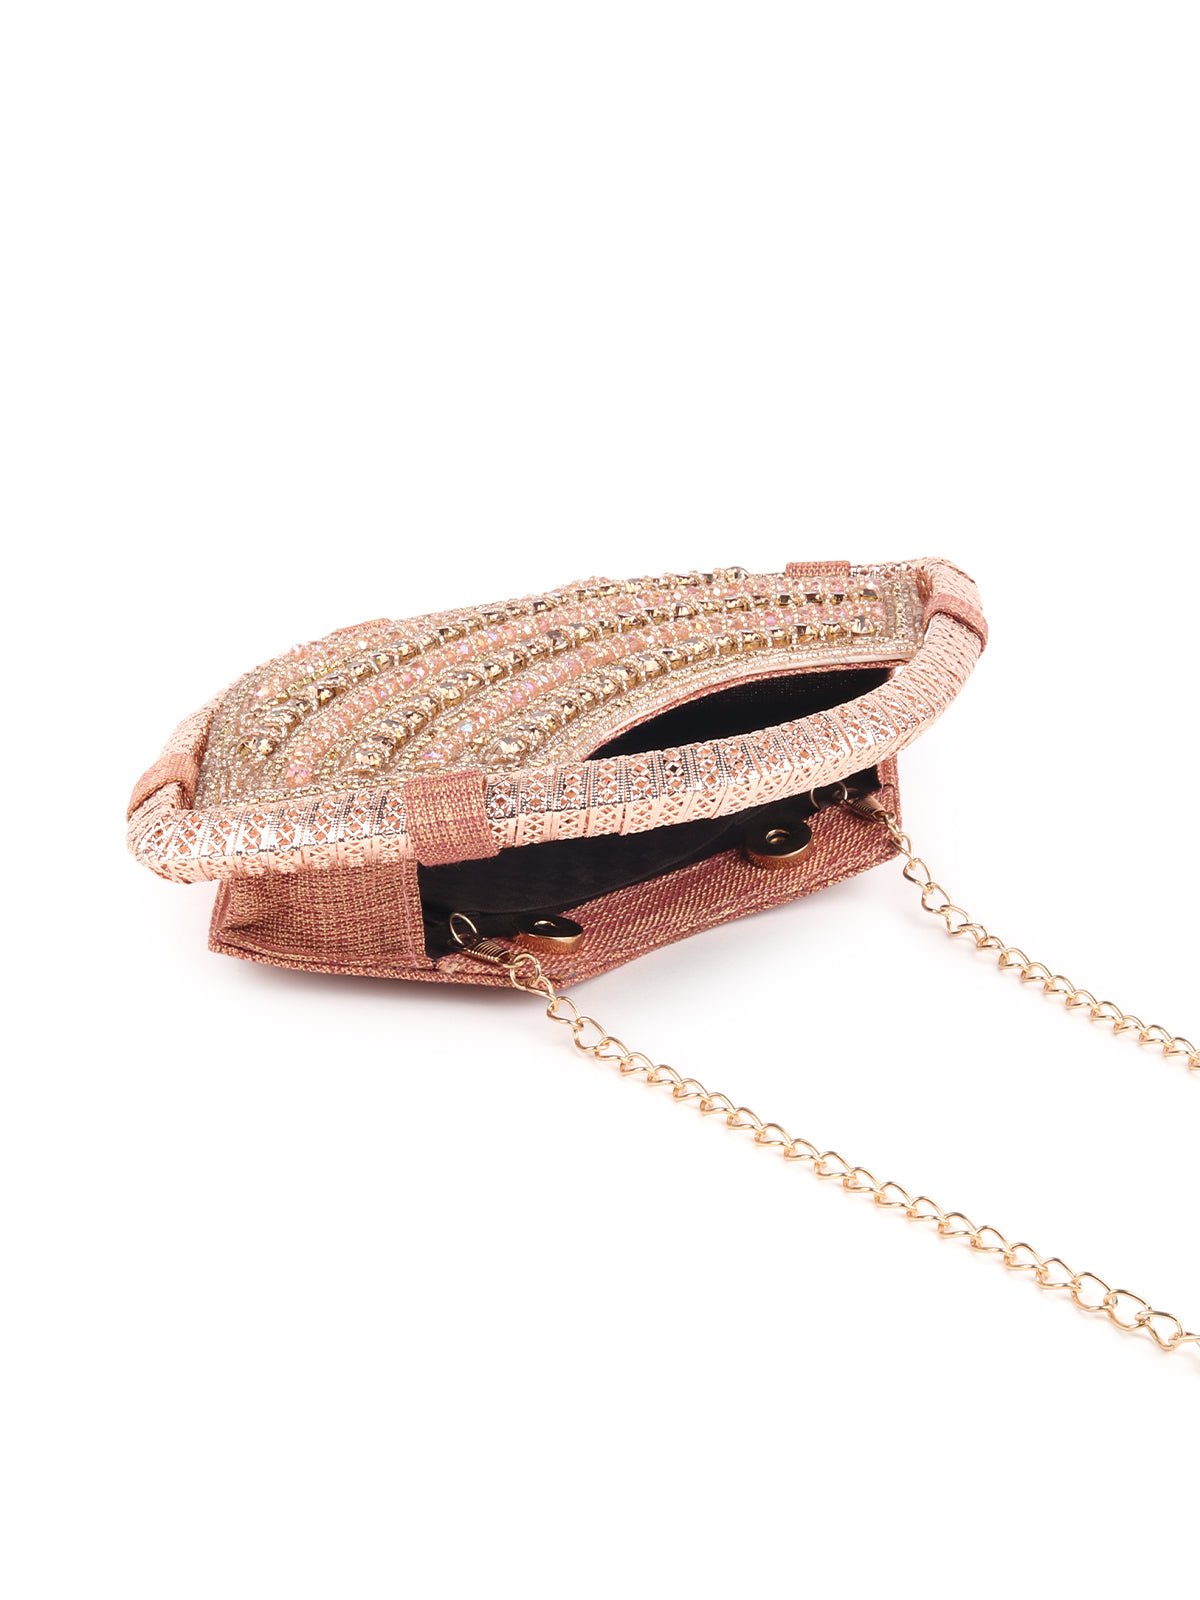 Odette Rose Gold Beads and Stone Embroidered Clutch for Women